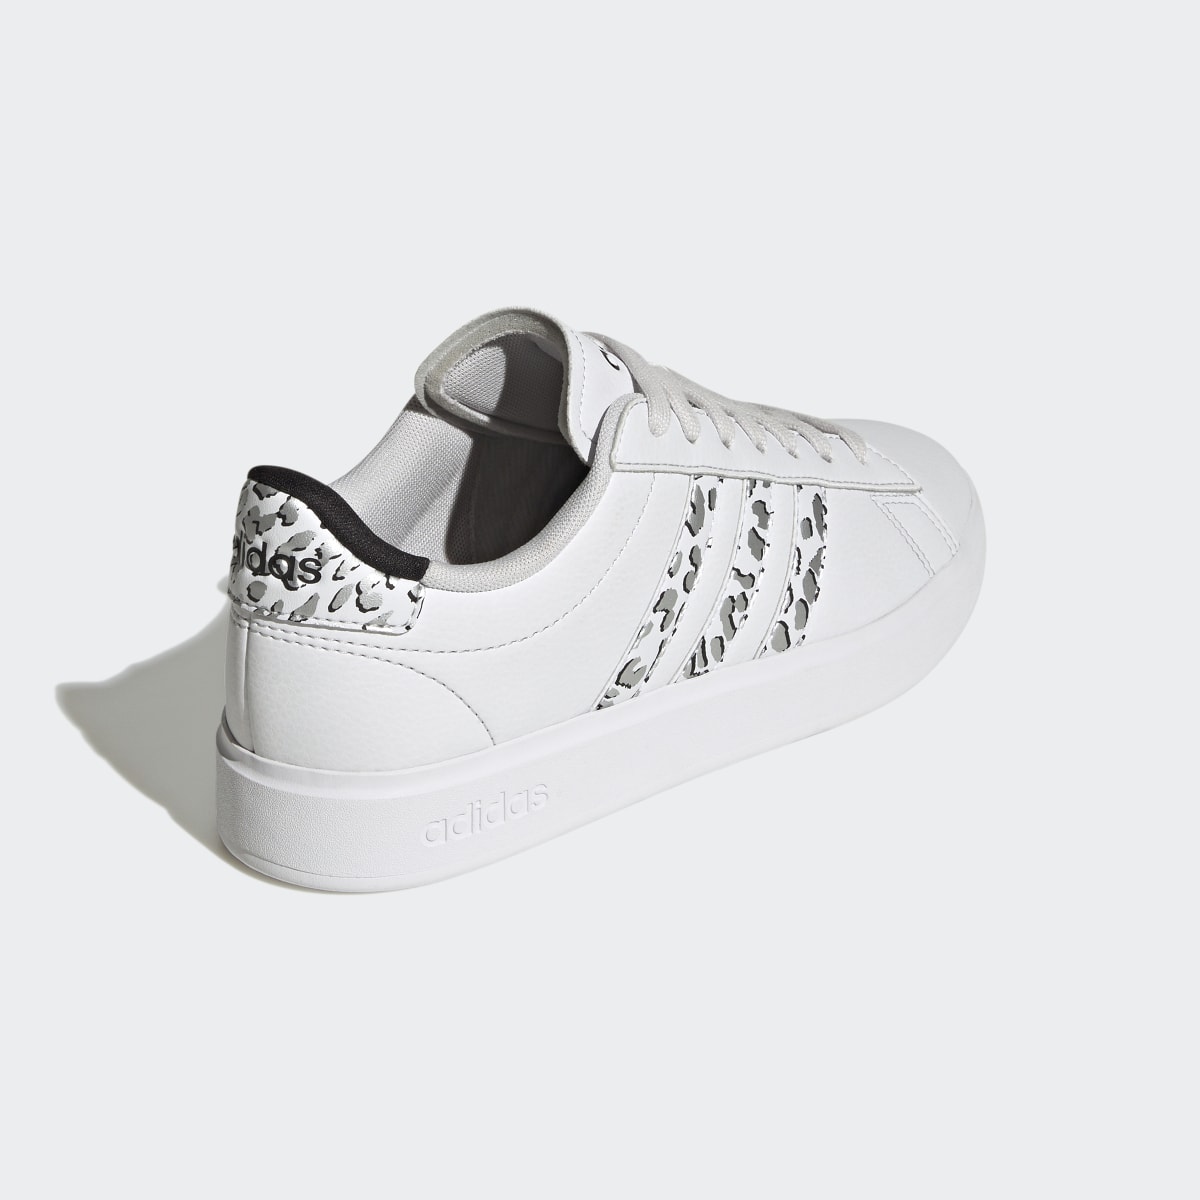 Adidas Grand Court Cloudfoam Lifestyle Court Comfort Style Schuh. 6